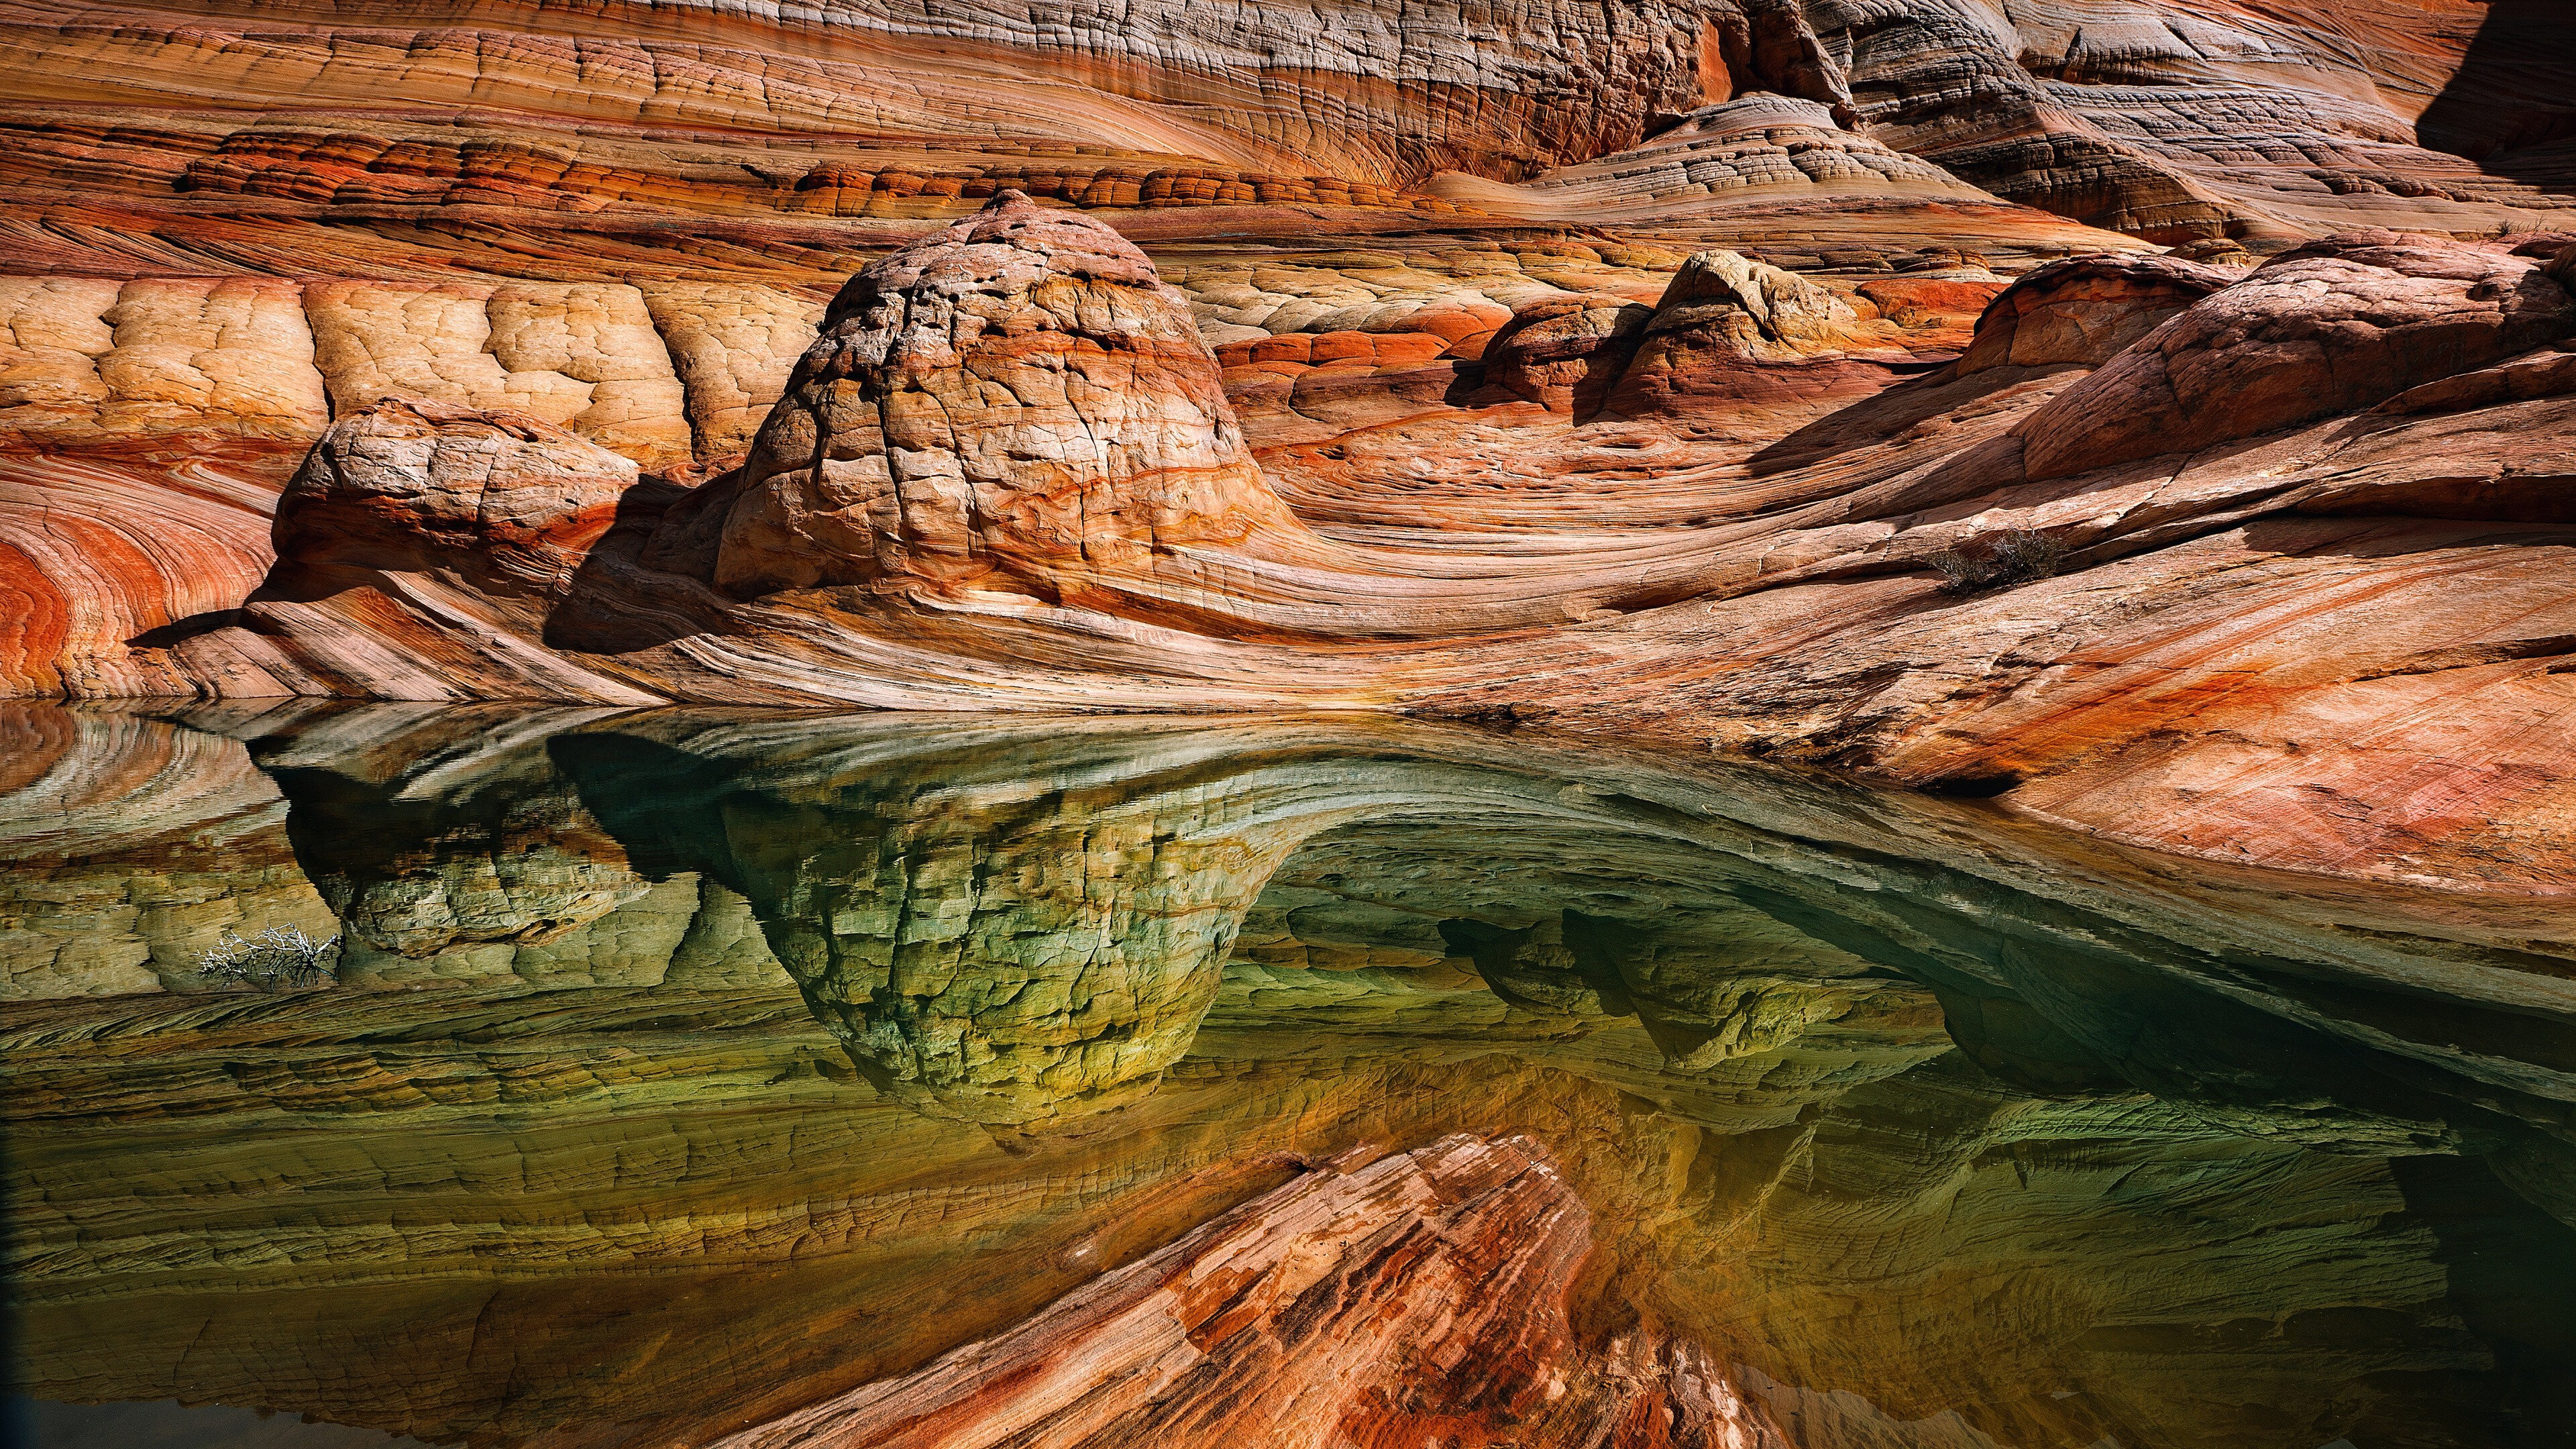 Geology: Rock formation, Reflections, Lake, Canyon, Section of wadi, Natural landscape. 3840x2160 4K Wallpaper.